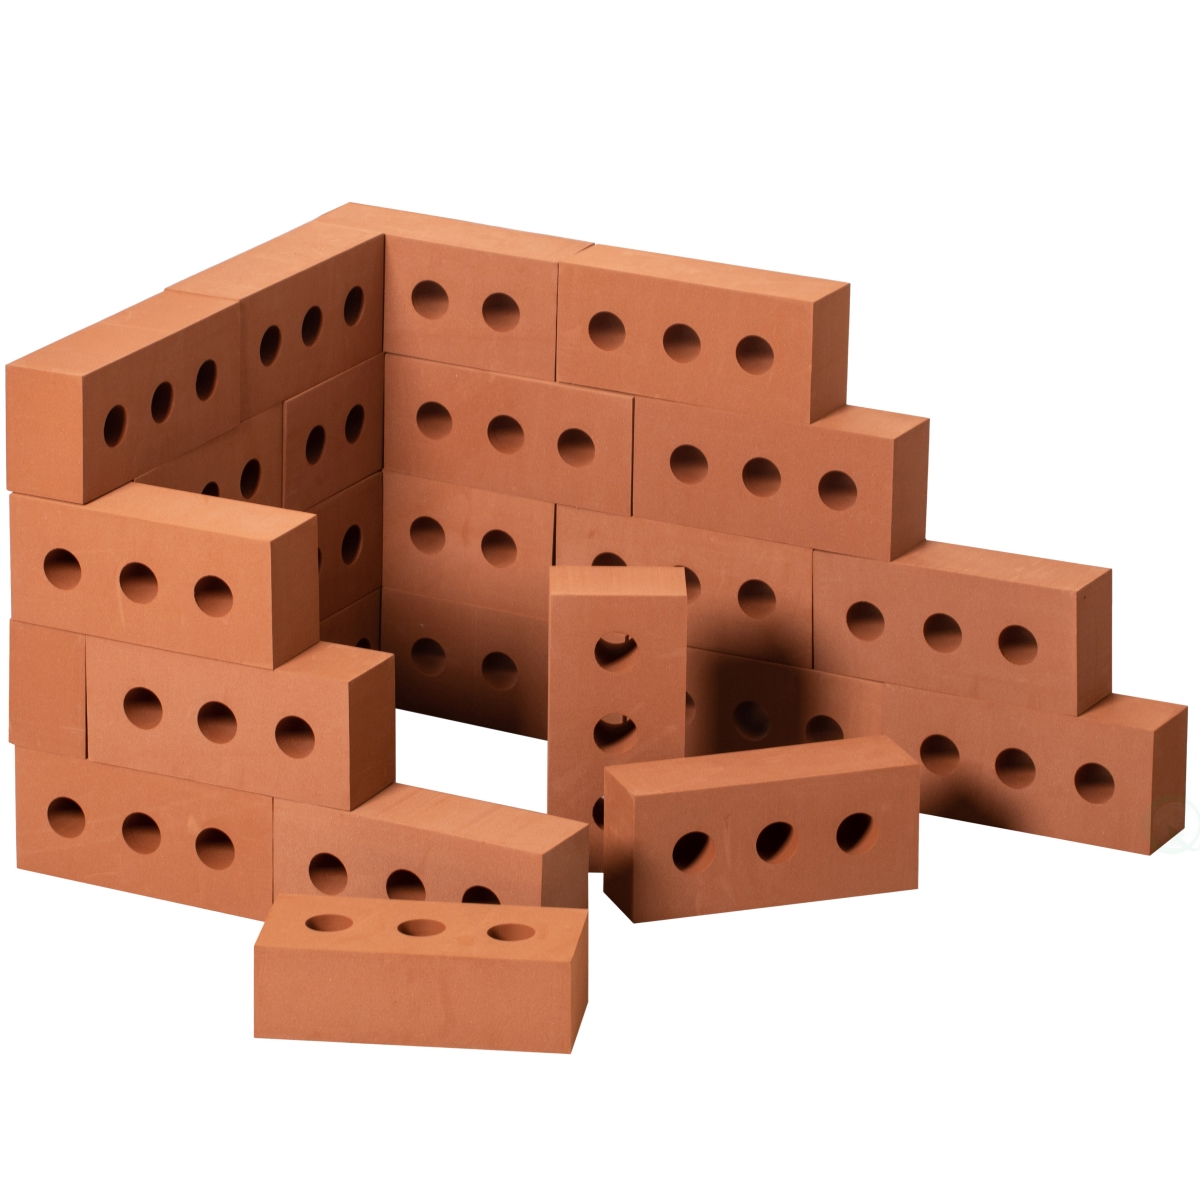 Picture of ShpilMaster QI004622.25 Construction Stacking Building Red Brick Block&#44; Rectangle Foam Kids Pretend Play Creativity Toy&#44; 25 Pack